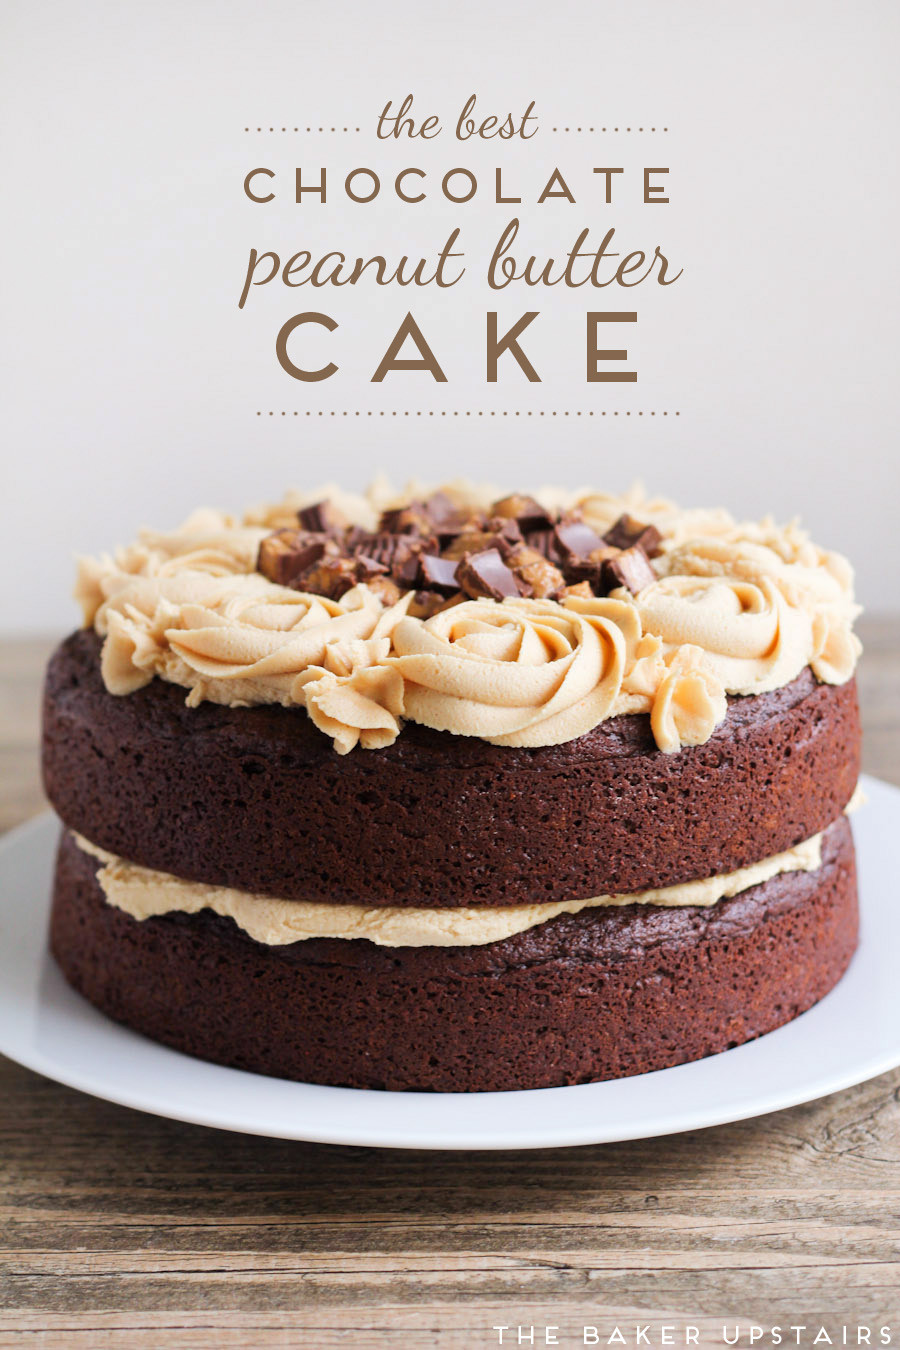 Peanut Butter Birthday Cake
 The Baker Upstairs the best chocolate peanut butter cake